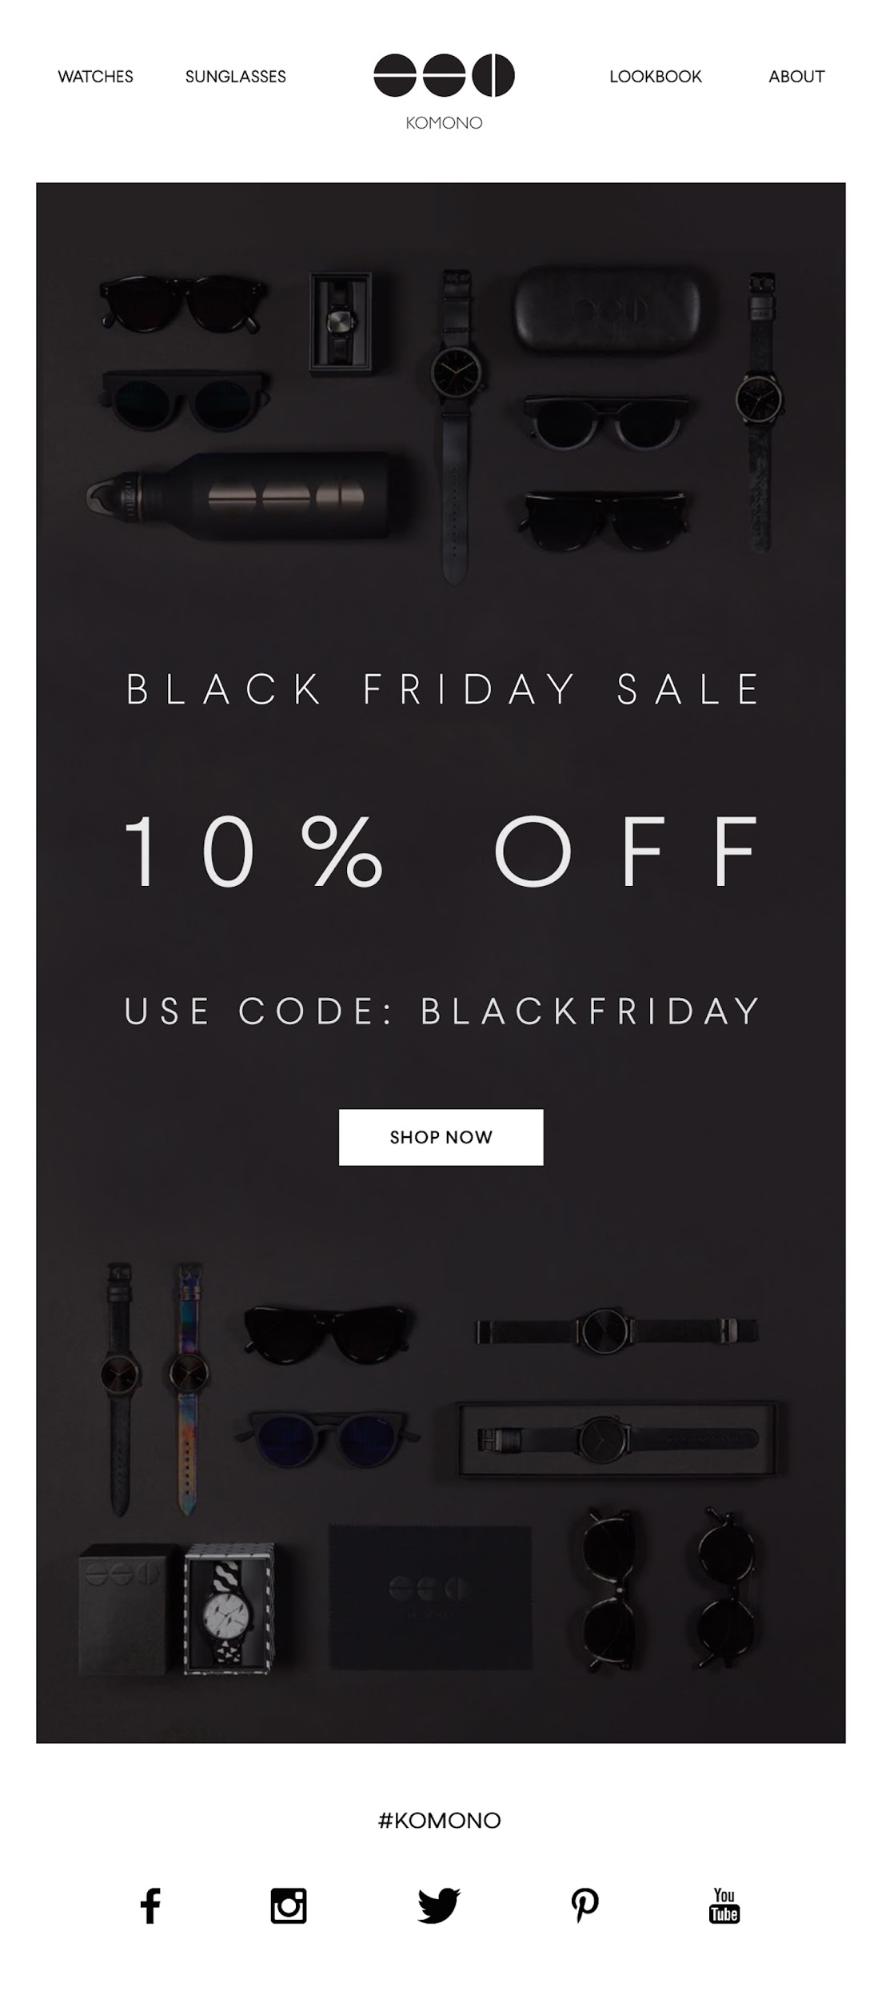 Successful Marketing Campaigns: Black Friday email campaign